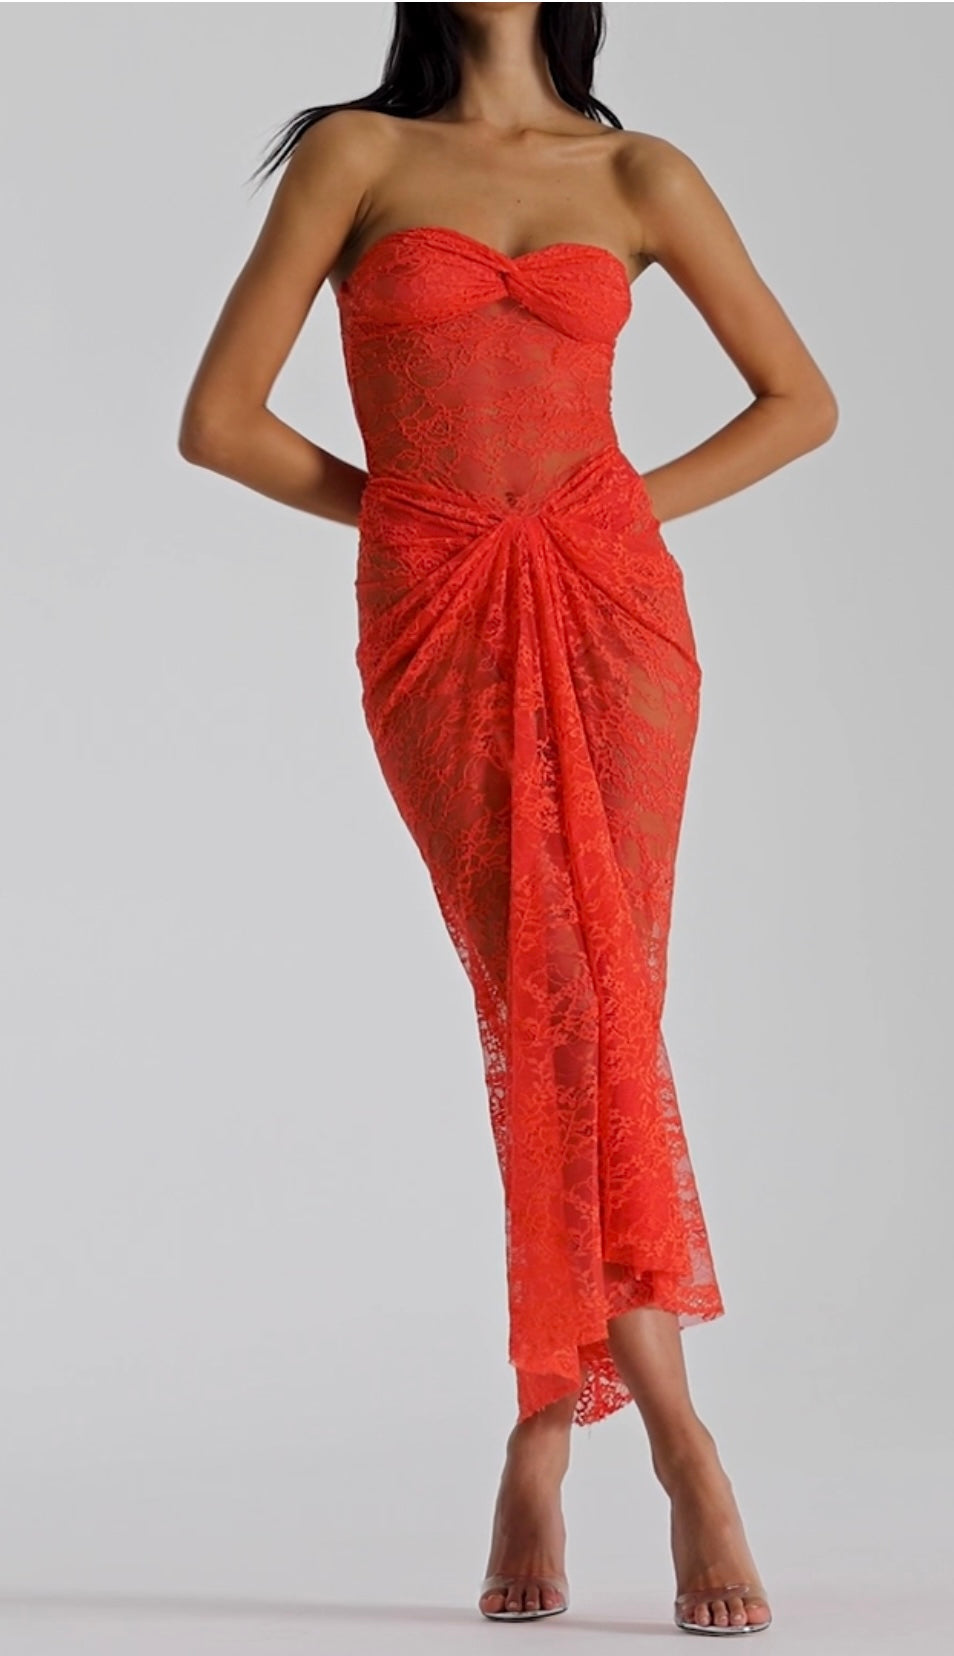 Hire Natalie Rolt Naomi Dress in Tangerine Lace